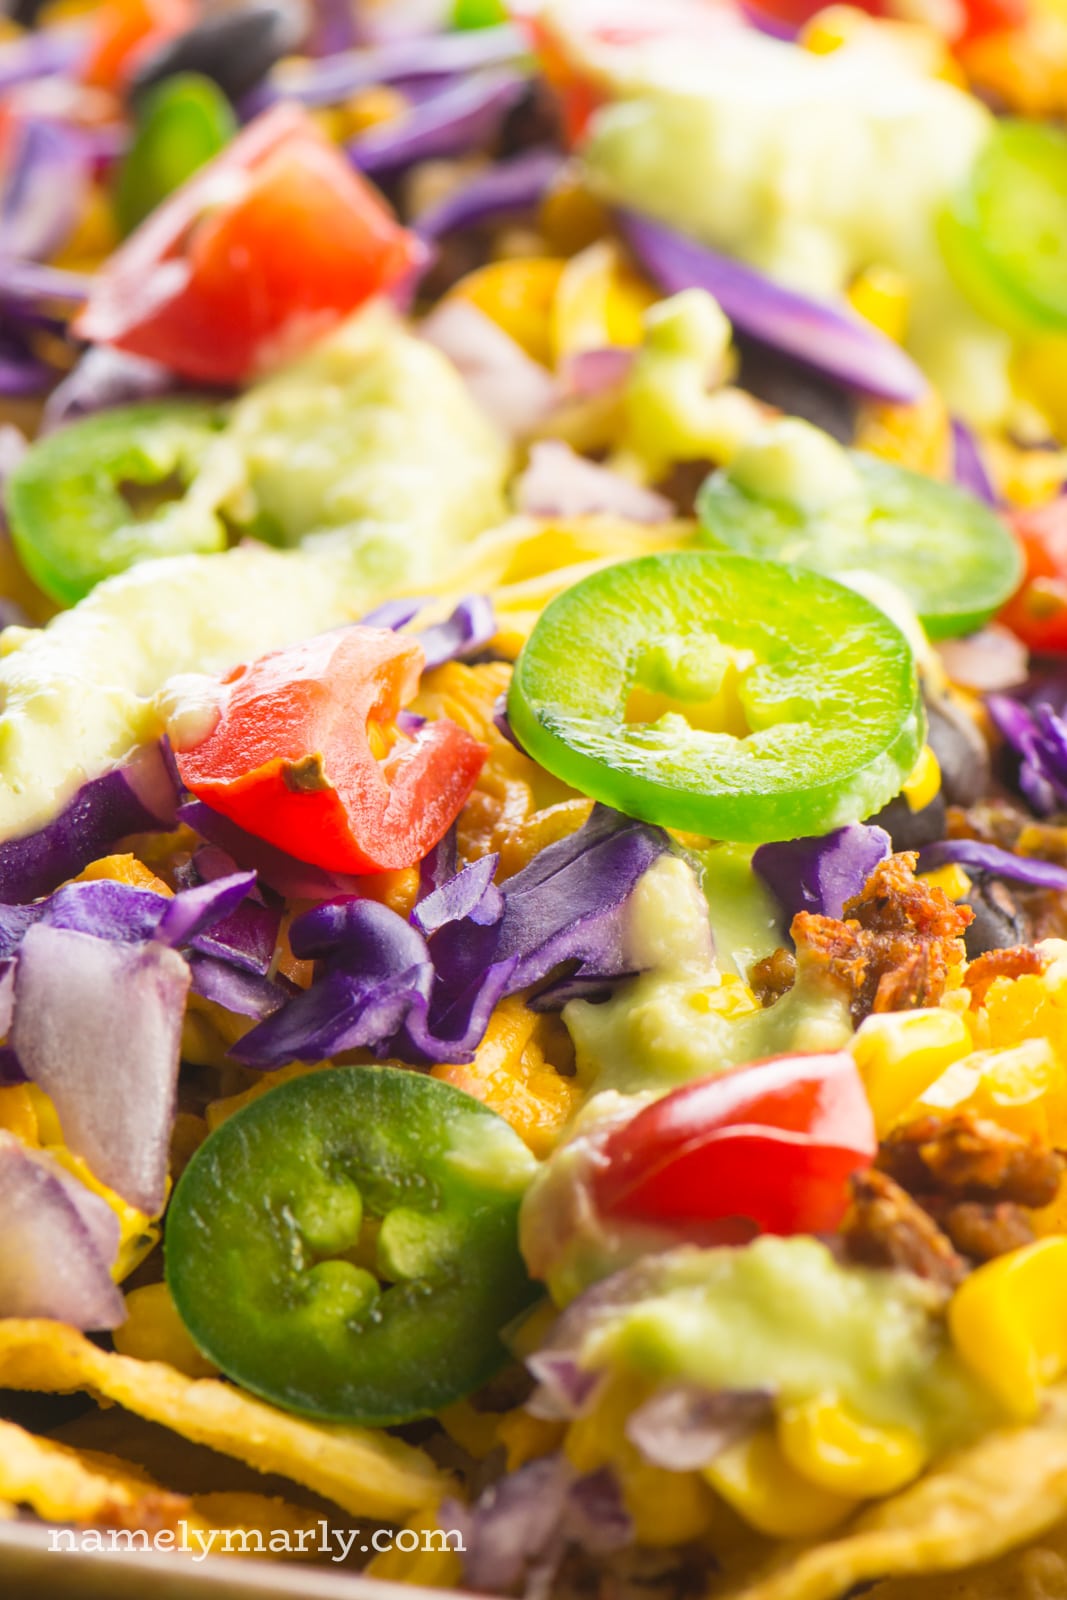 A close-up shot of a tray of baked vegan nachos shows purple cabbage, red tomatoes, and green jalapeño slices.